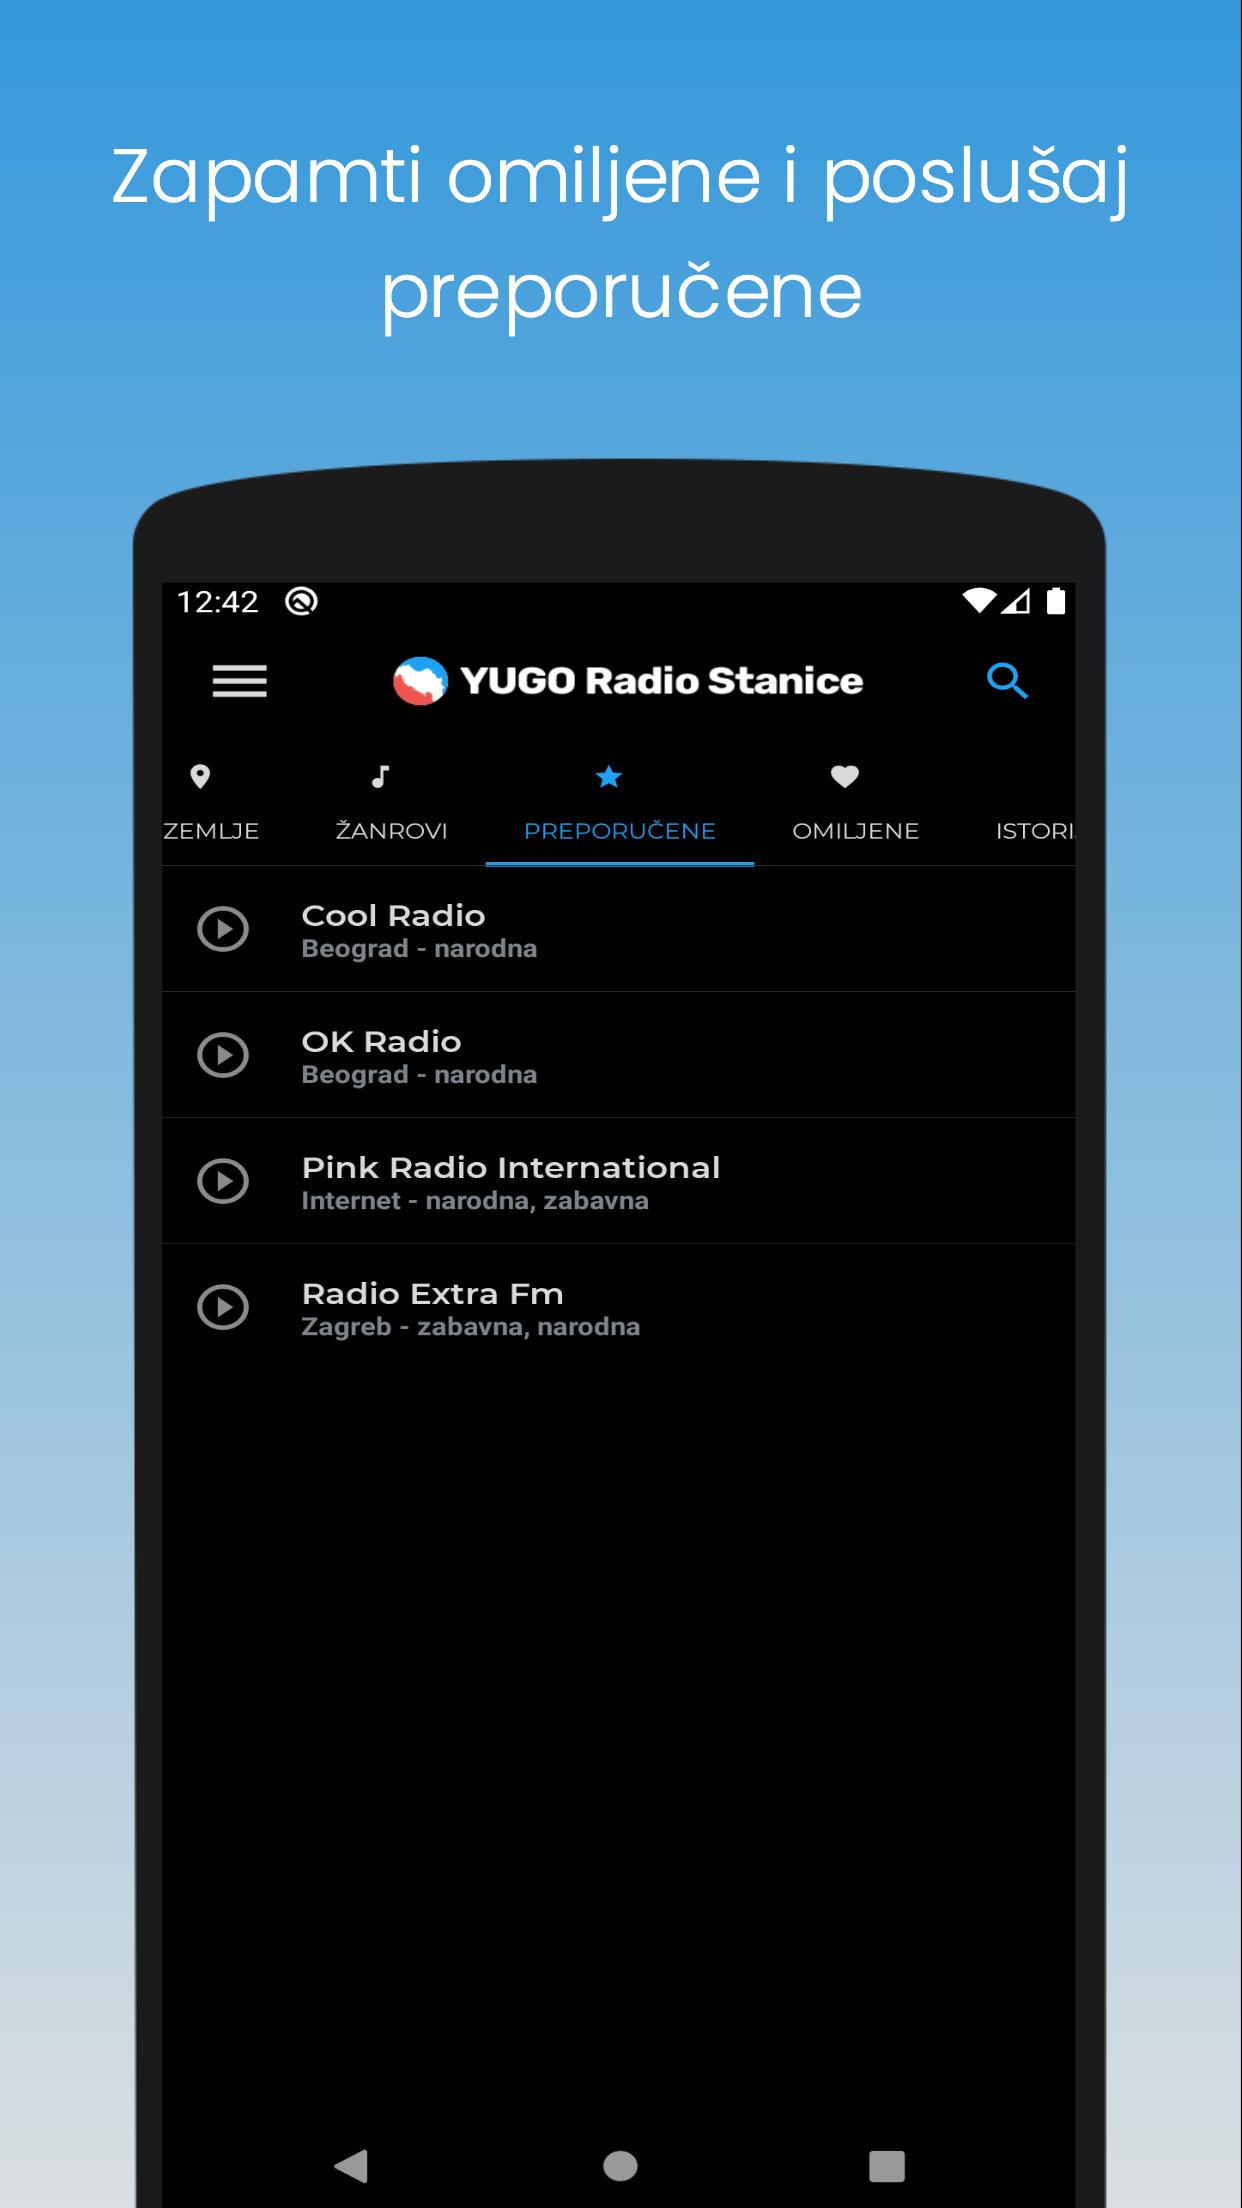 Yugo Radio Stanice for Android - APK Download